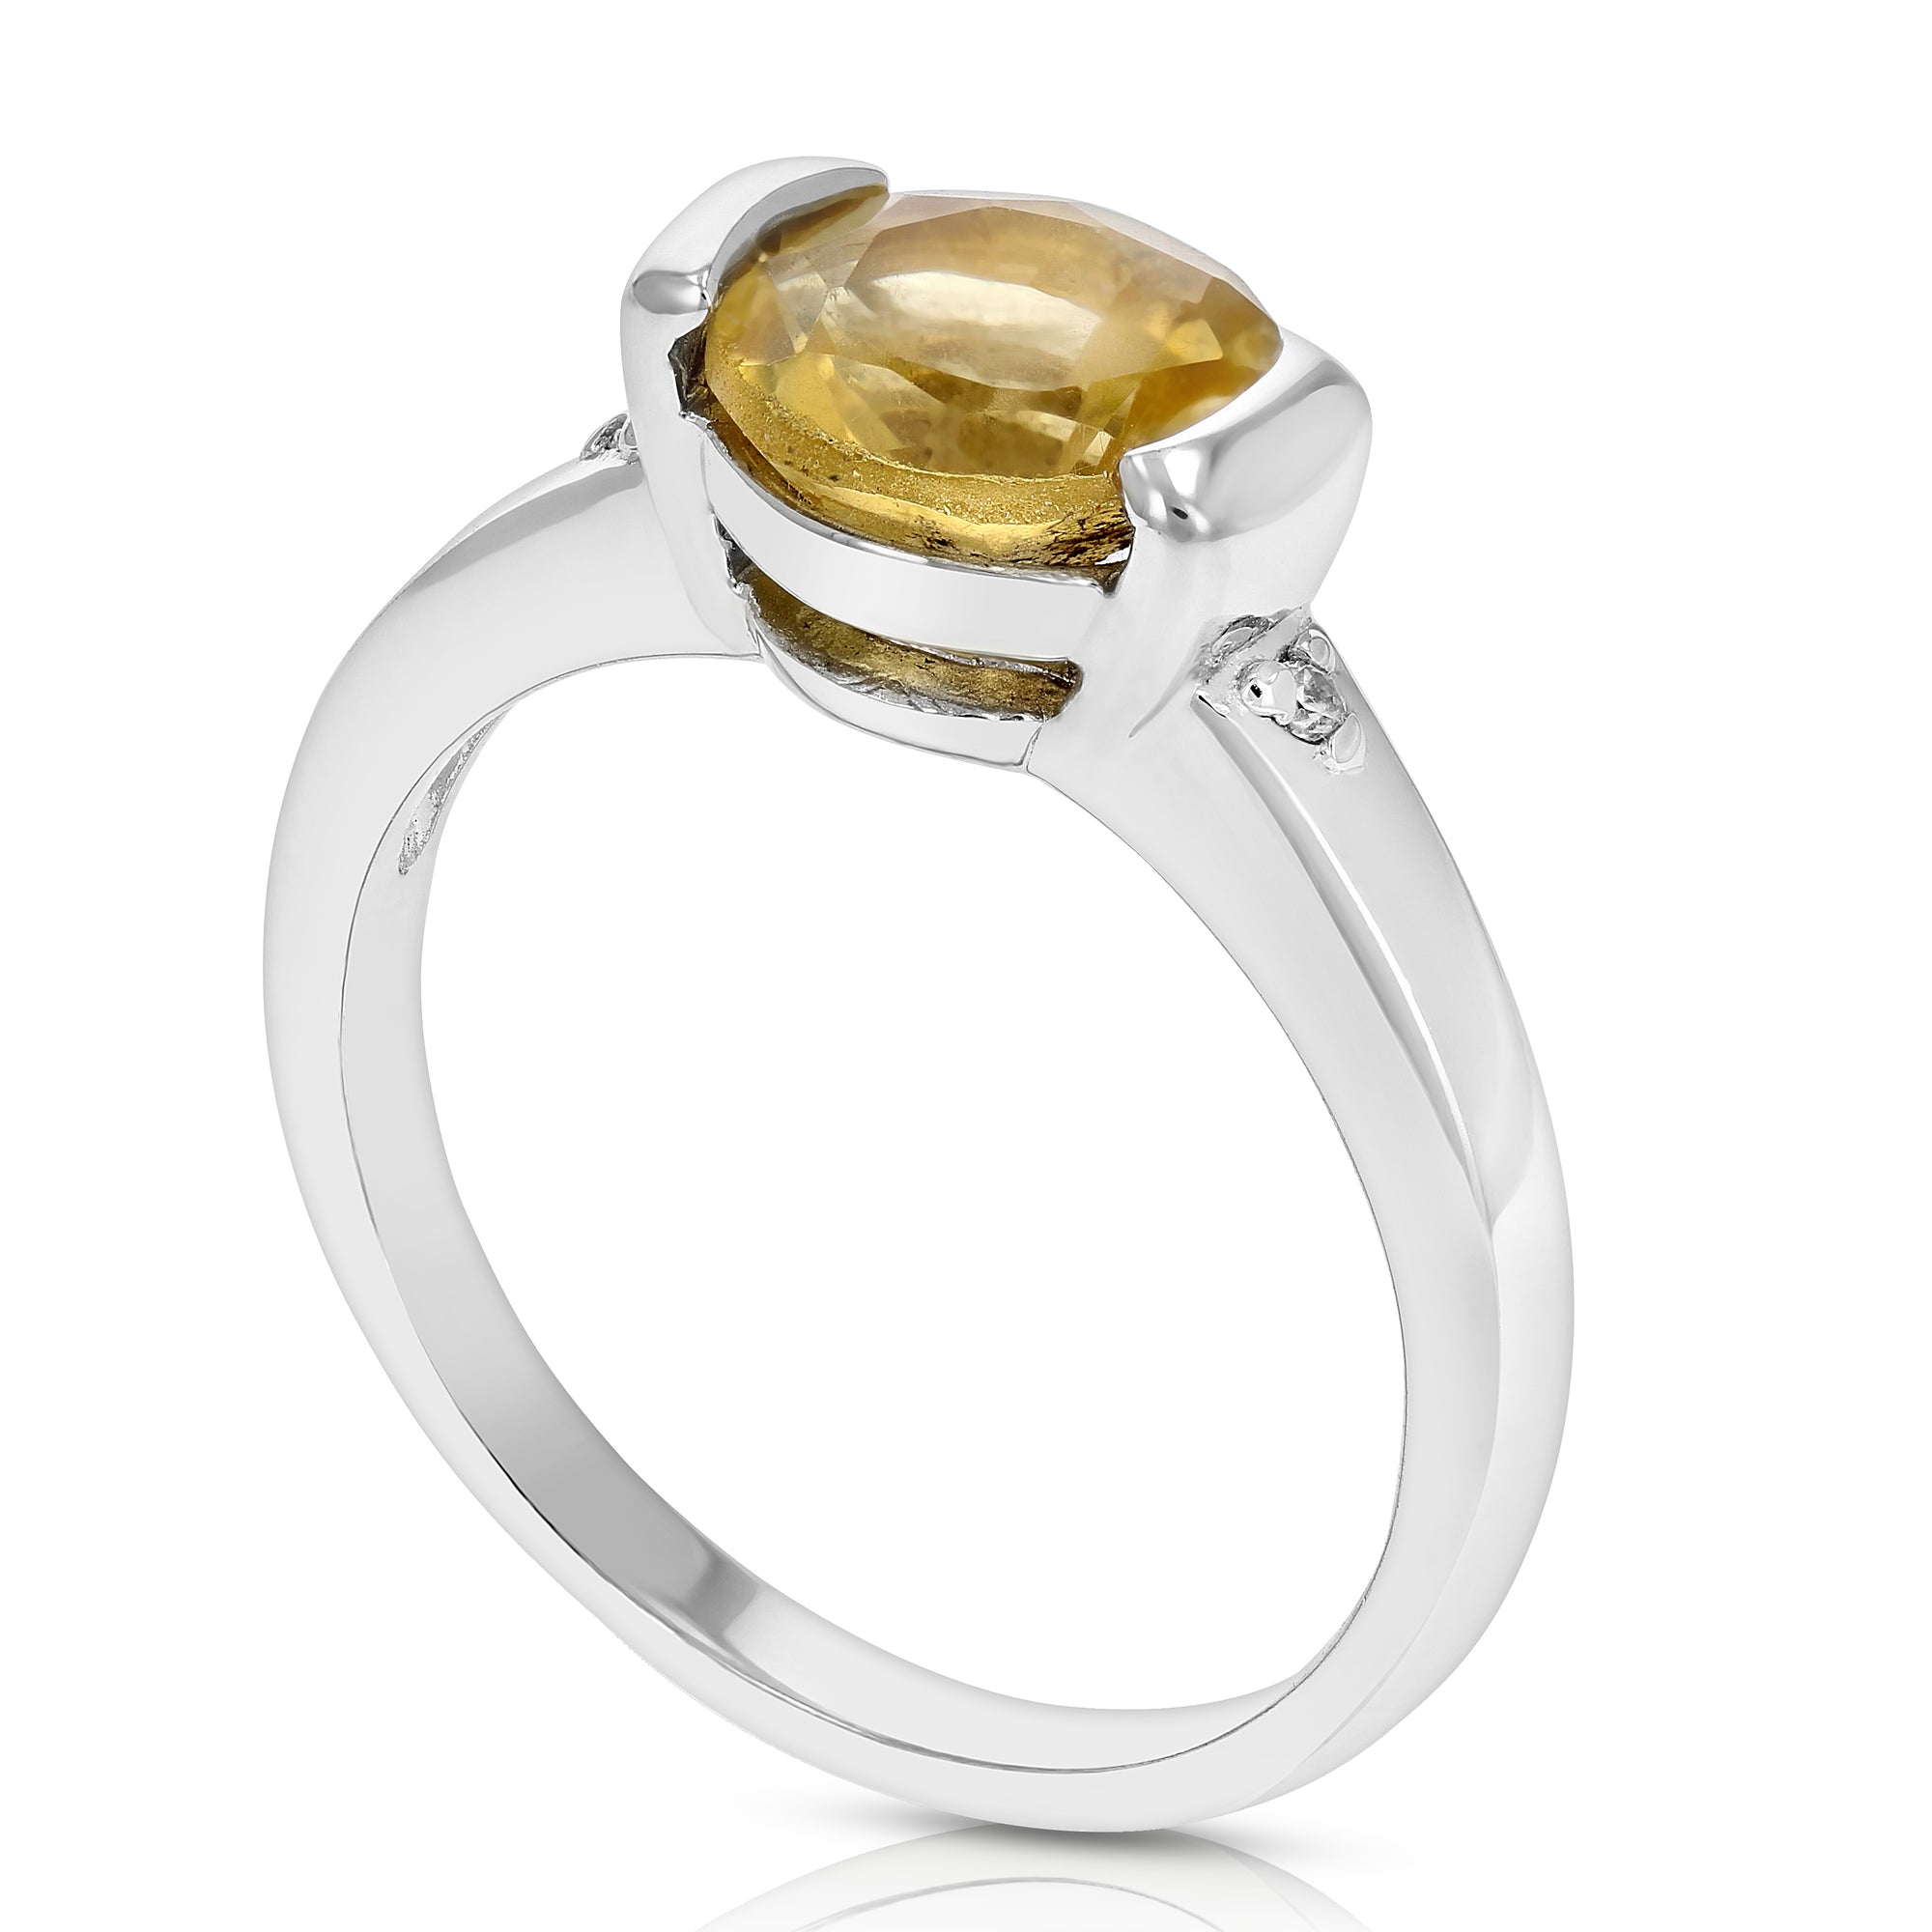 1.30 cttw Citrine Ring in .925 Sterling Silver with Rhodium Plating Round Shape